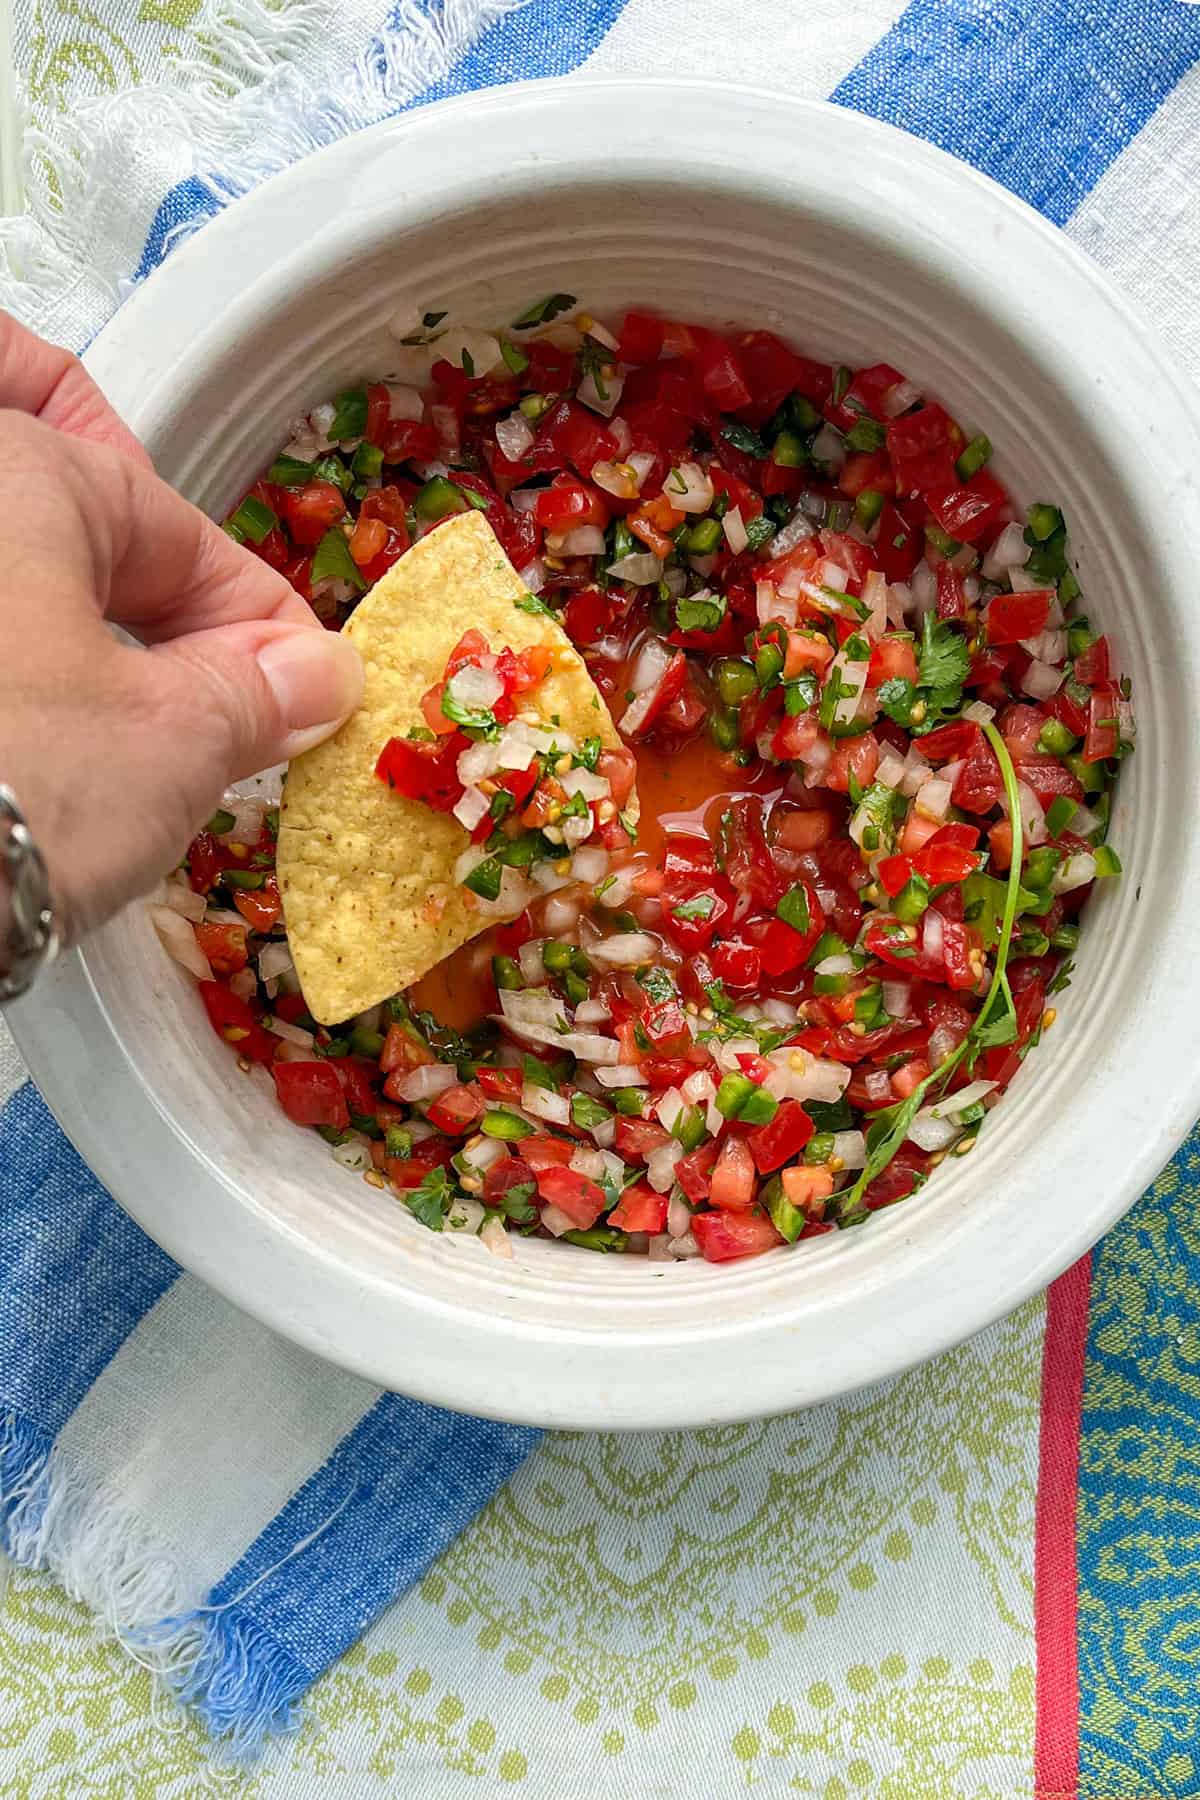 A corn tortilla chip being dipped into a bowl filled with finely chopped salsa fresca made from tomatoes, chilies, onion and cilantro.